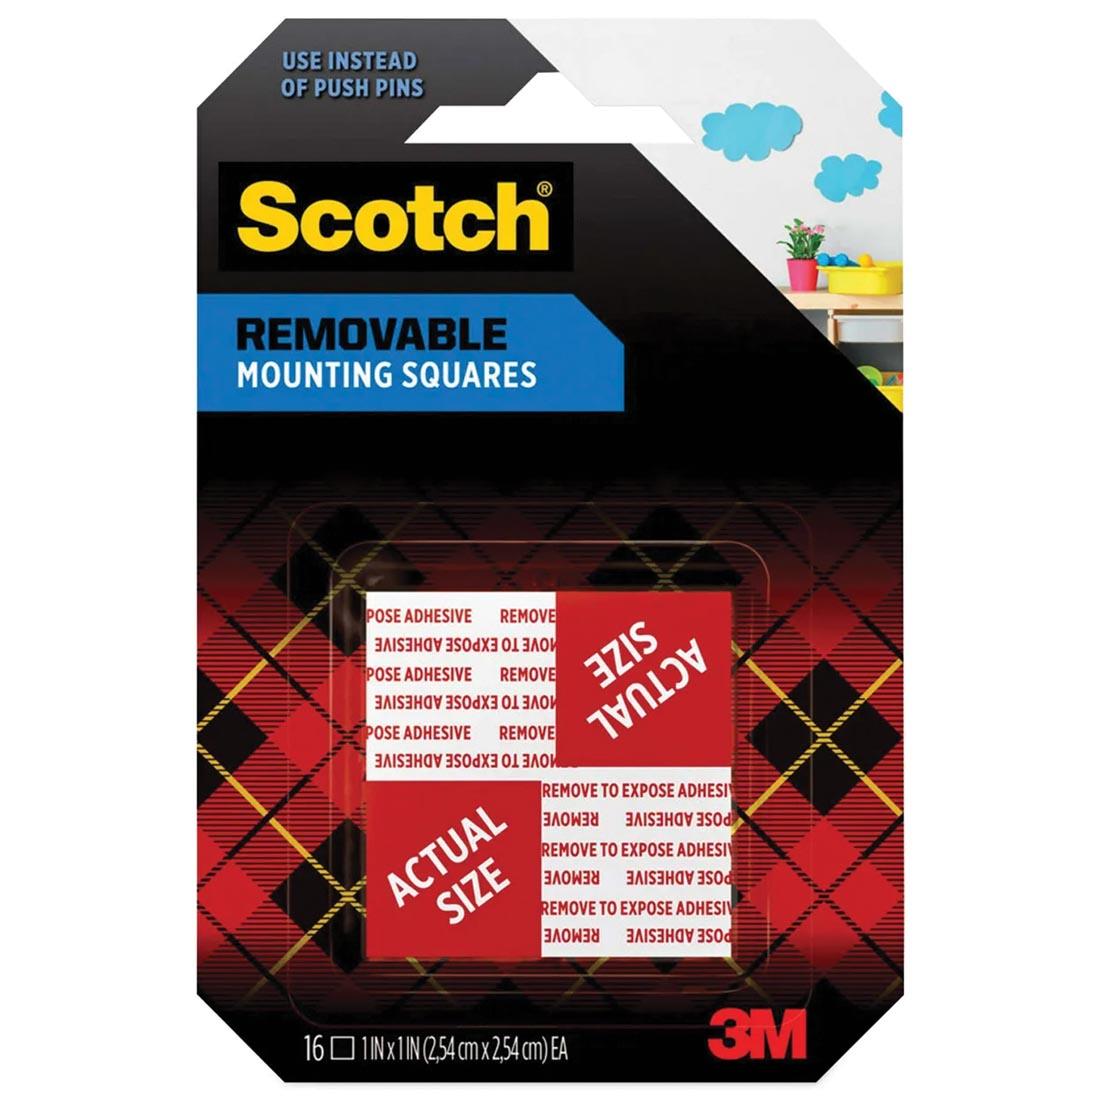 Scotch Removable Mounting Squares 16-count package, 1" squares